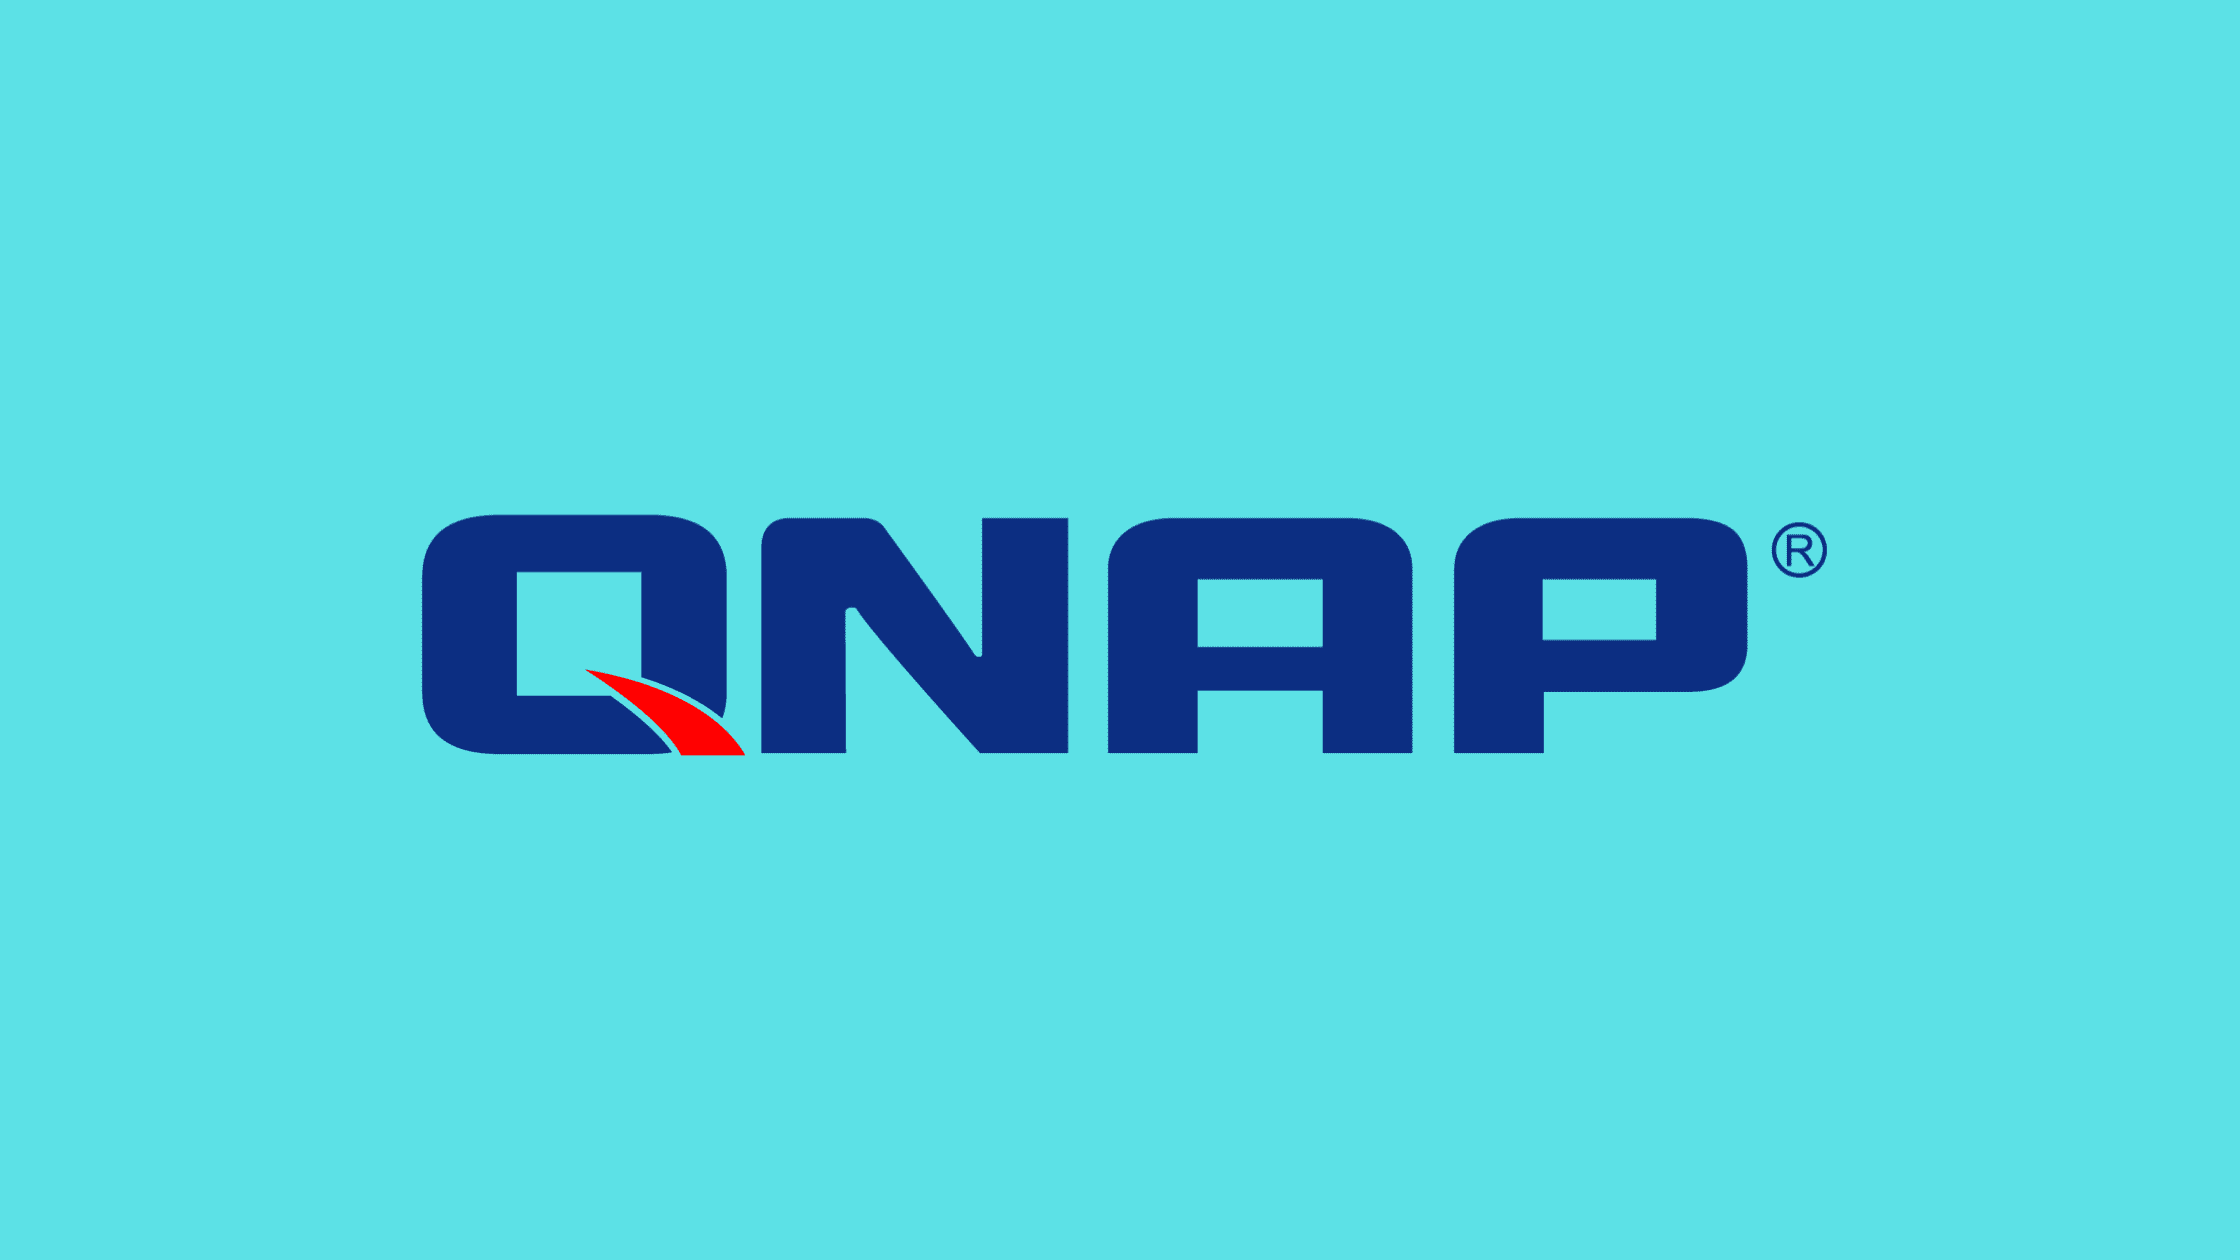 How To Fix Cve 2022 27596 A Code Injection Vulnerability In Qnap Nas Devices That Lead To Rce Attack